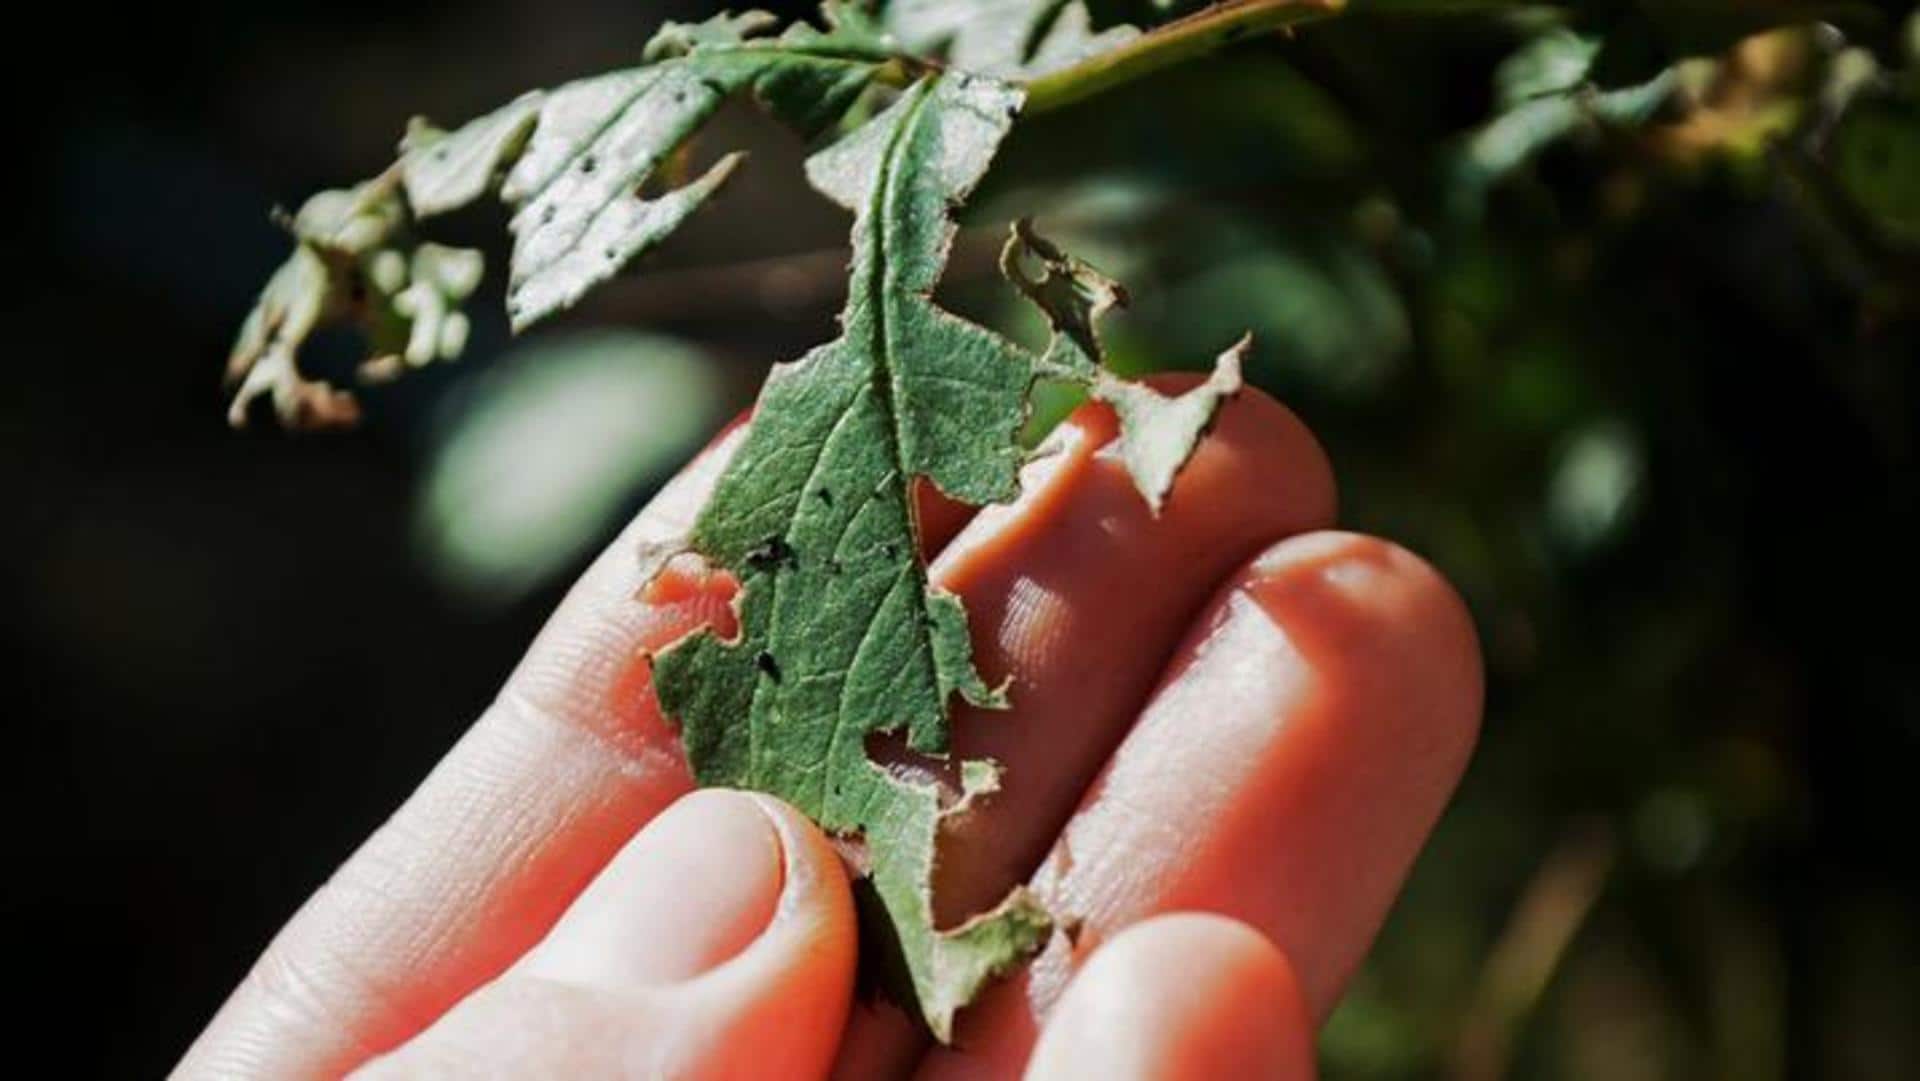 Plant diseases you should be aware of in your garden